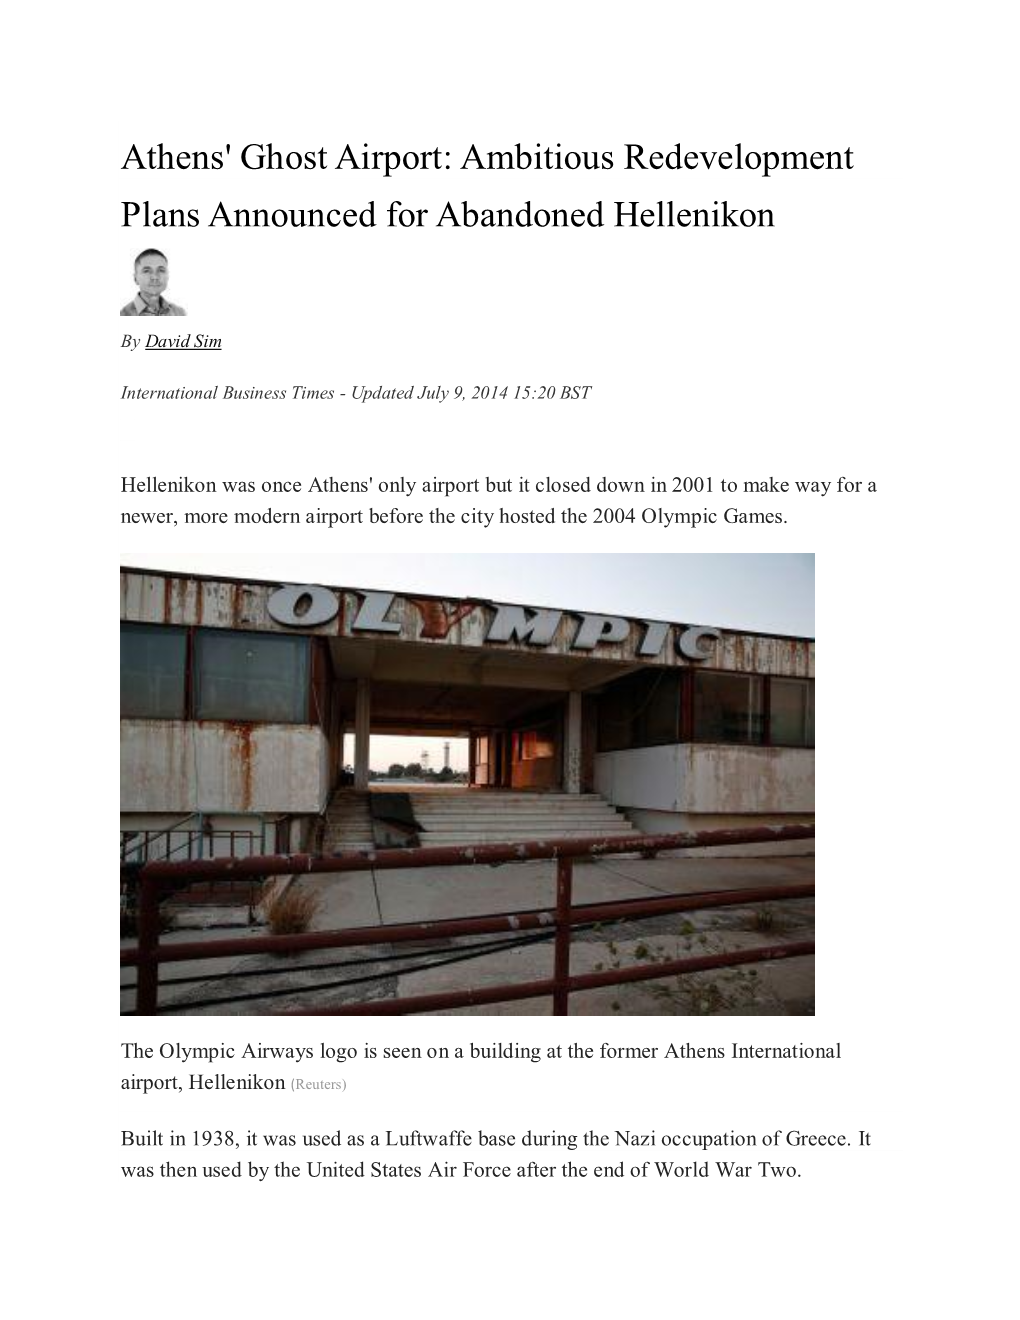 Athens' Ghost Airport: Ambitious Redevelopment Plans Announced for Abandoned Hellenikon